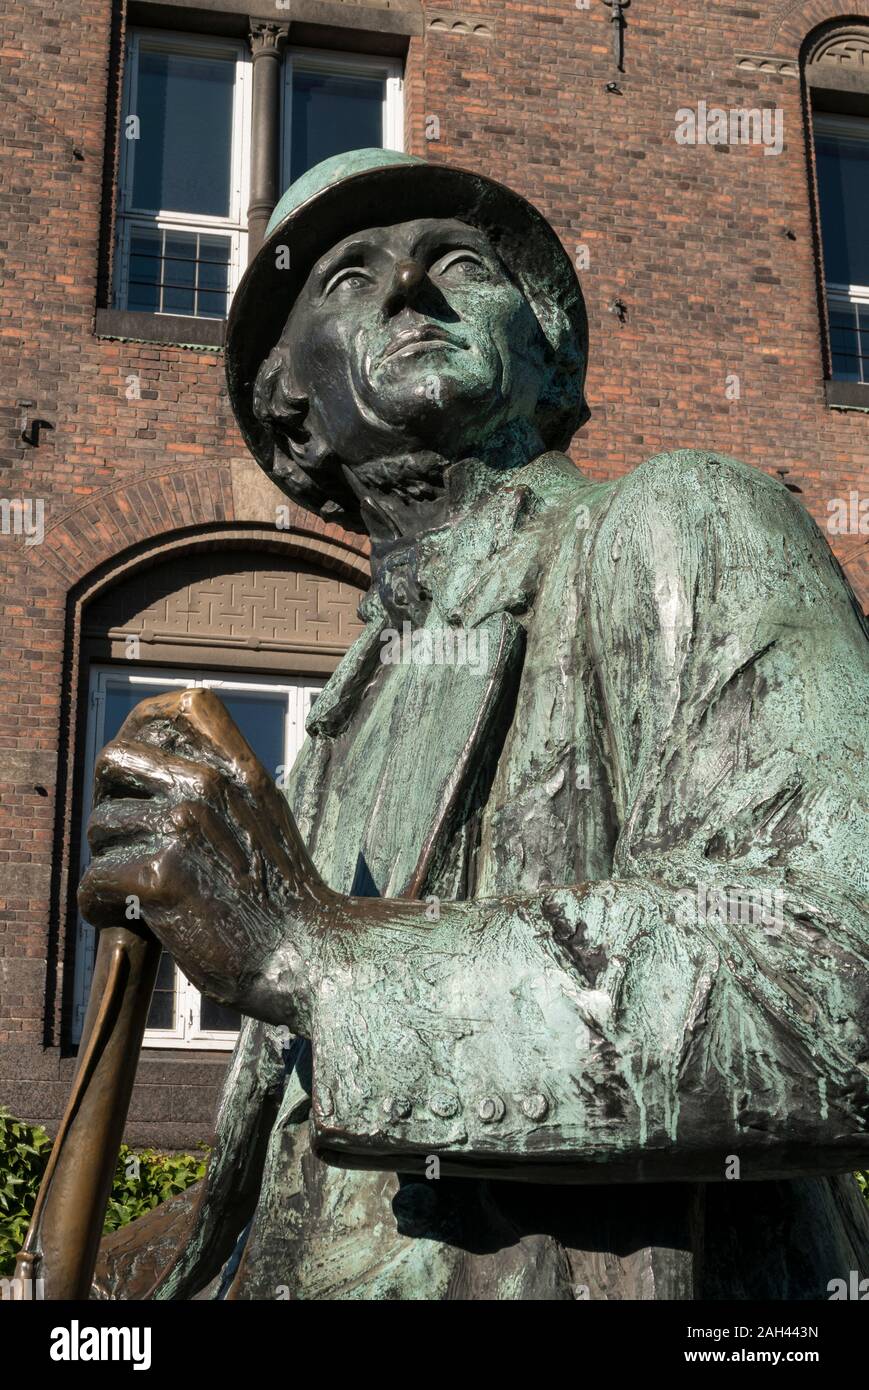 The bronze statue of Hans Christian Andersen, near City Hall Square ...